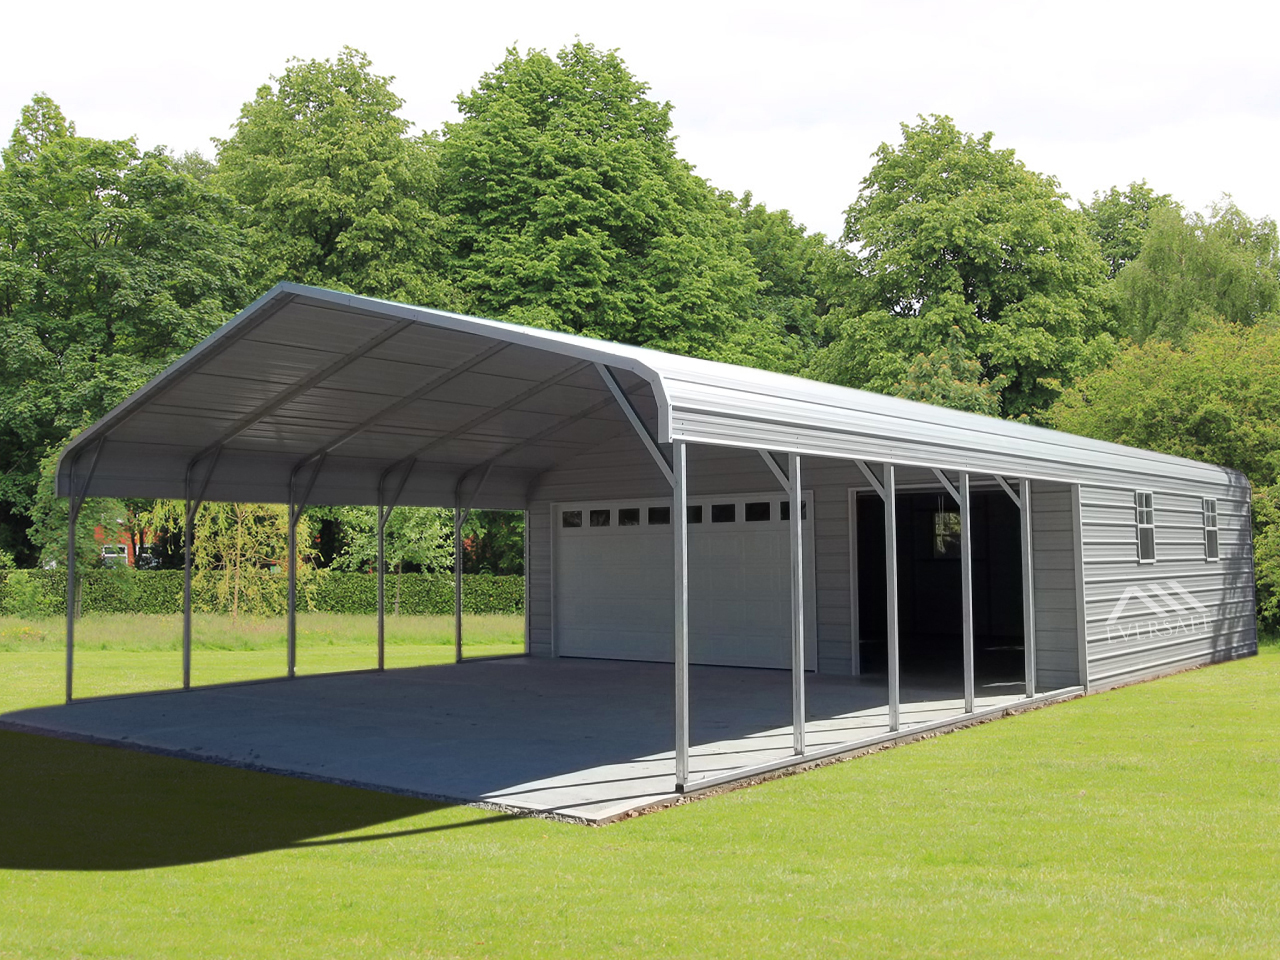 Metal Carport With Storage Building Attached - Image to u